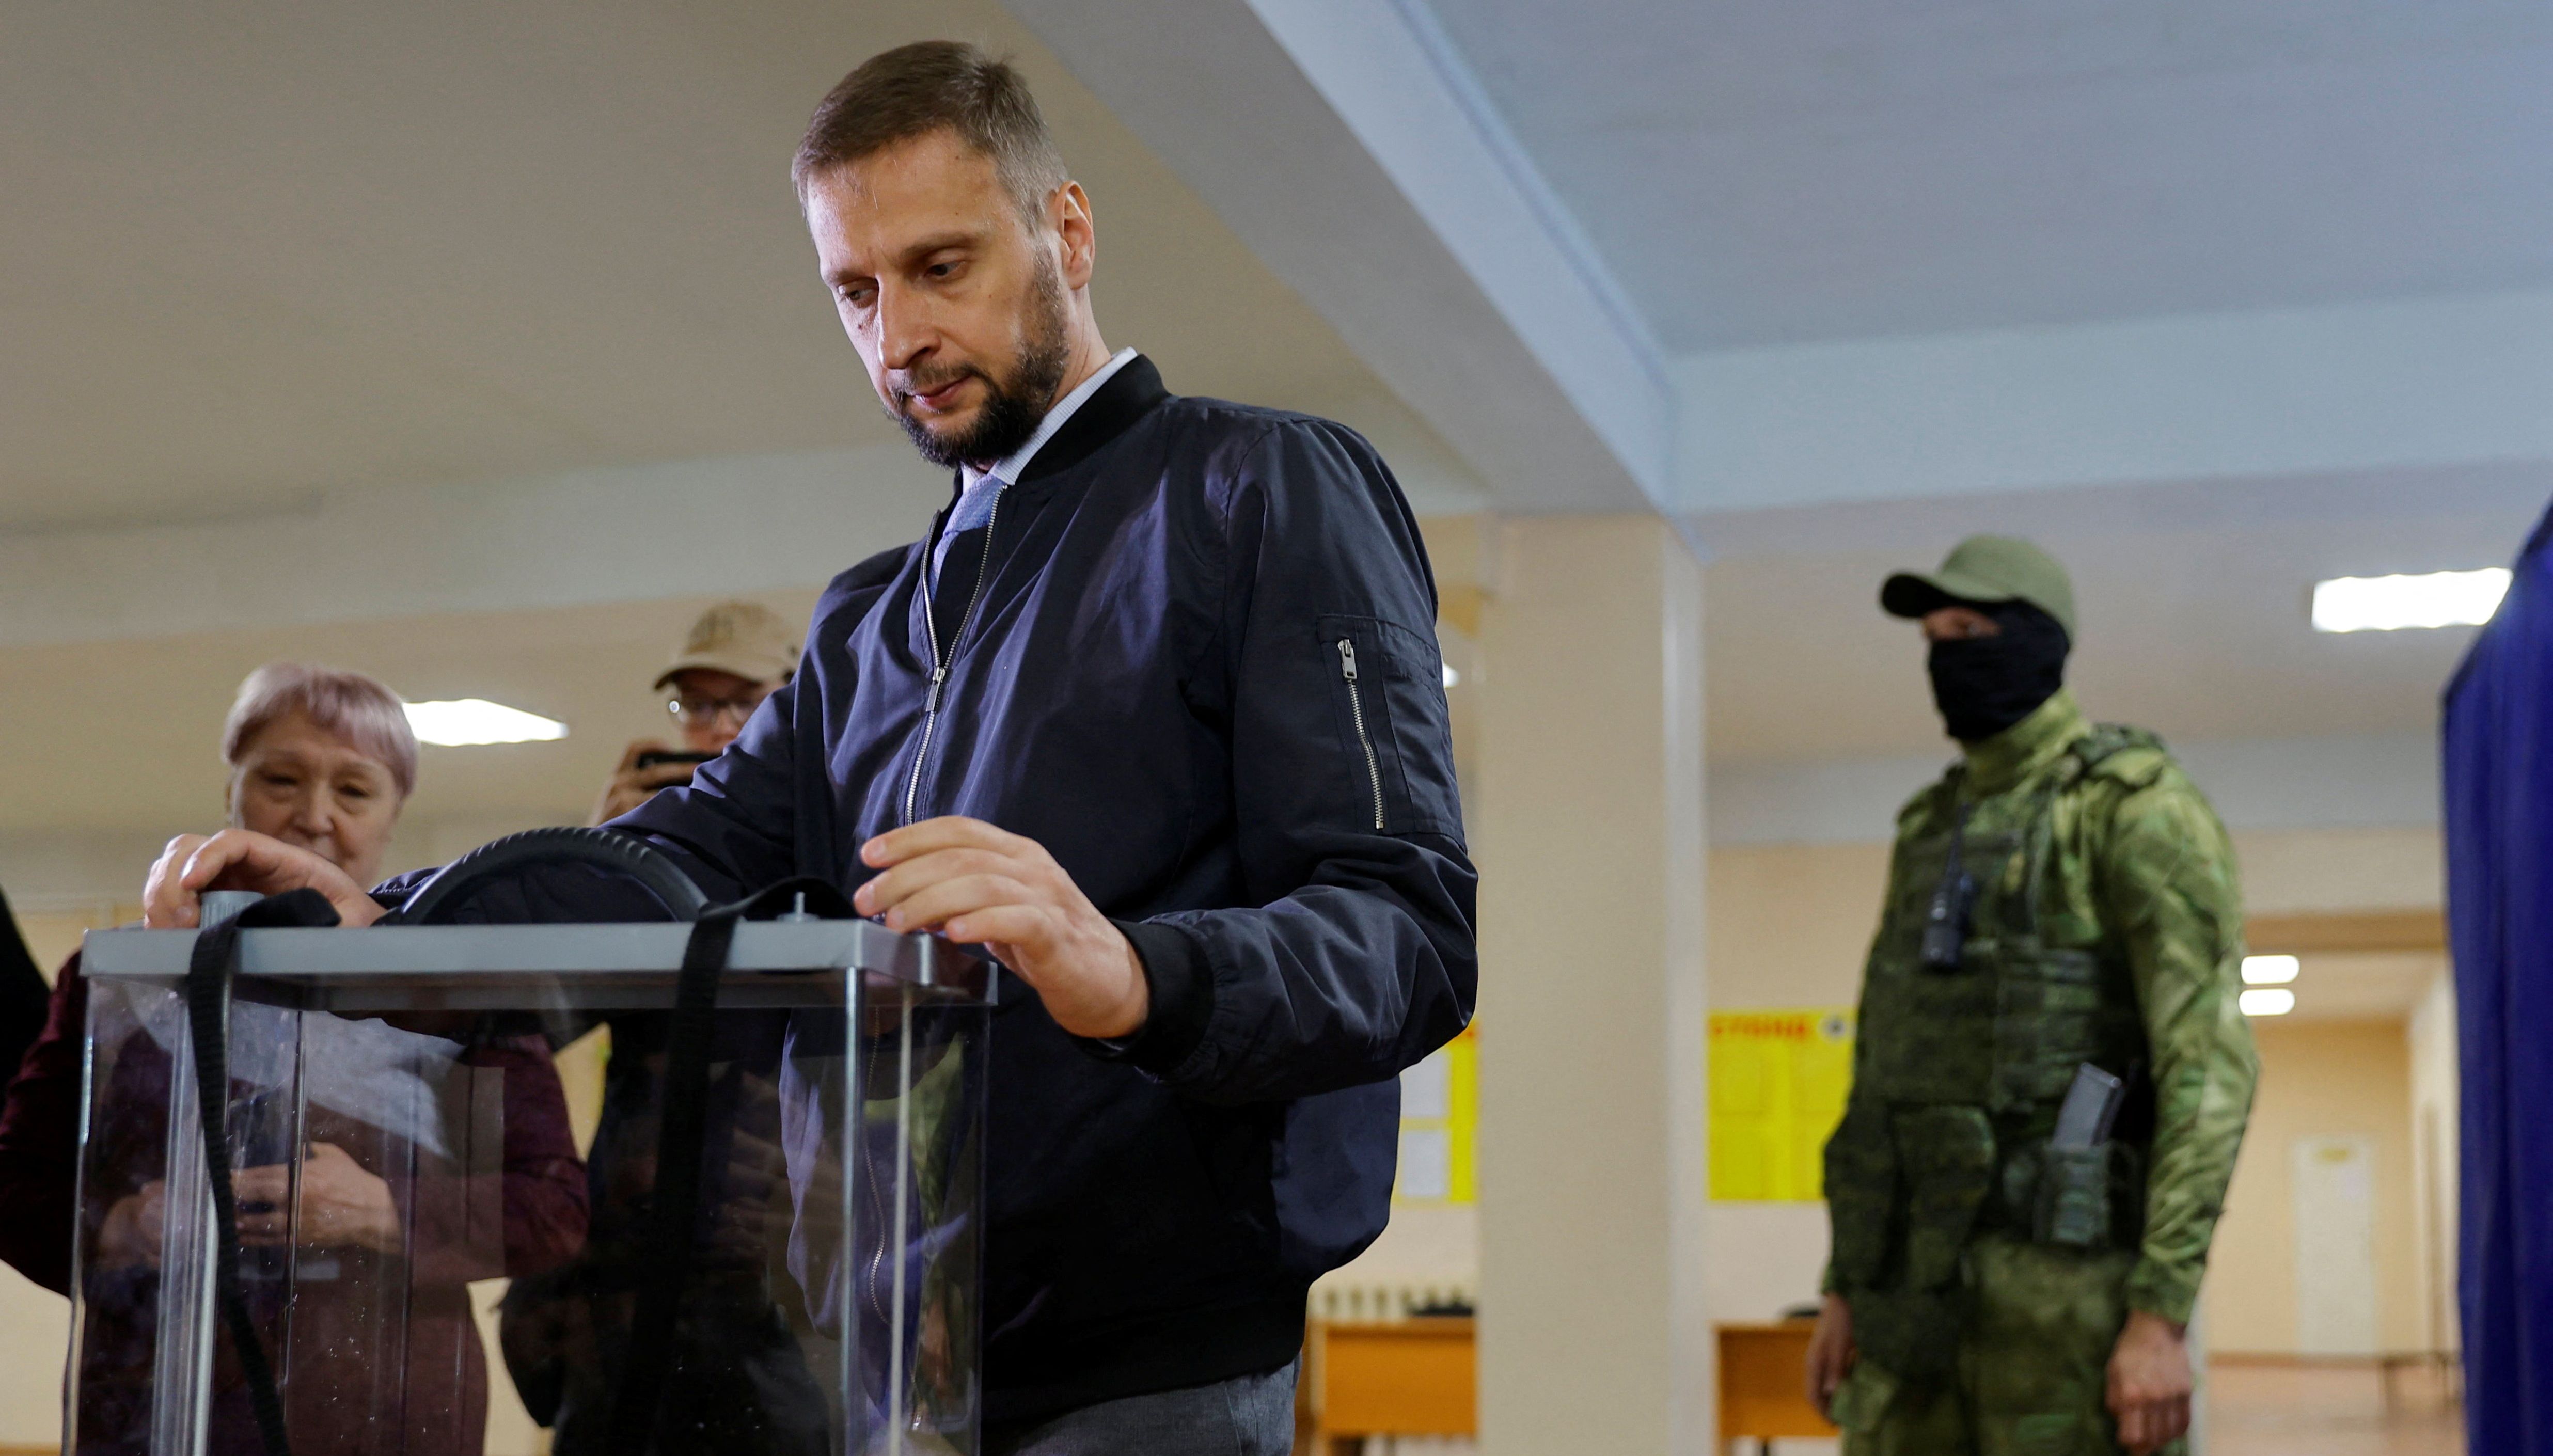 Head of the central electoral commission of the self-proclaimed Donetsk people's republic Vladimir Vysotsky visits a polling station ahead of the planned referendum on the joining of the Donetsk people's republic to Russia, in Donetsk, Ukraine